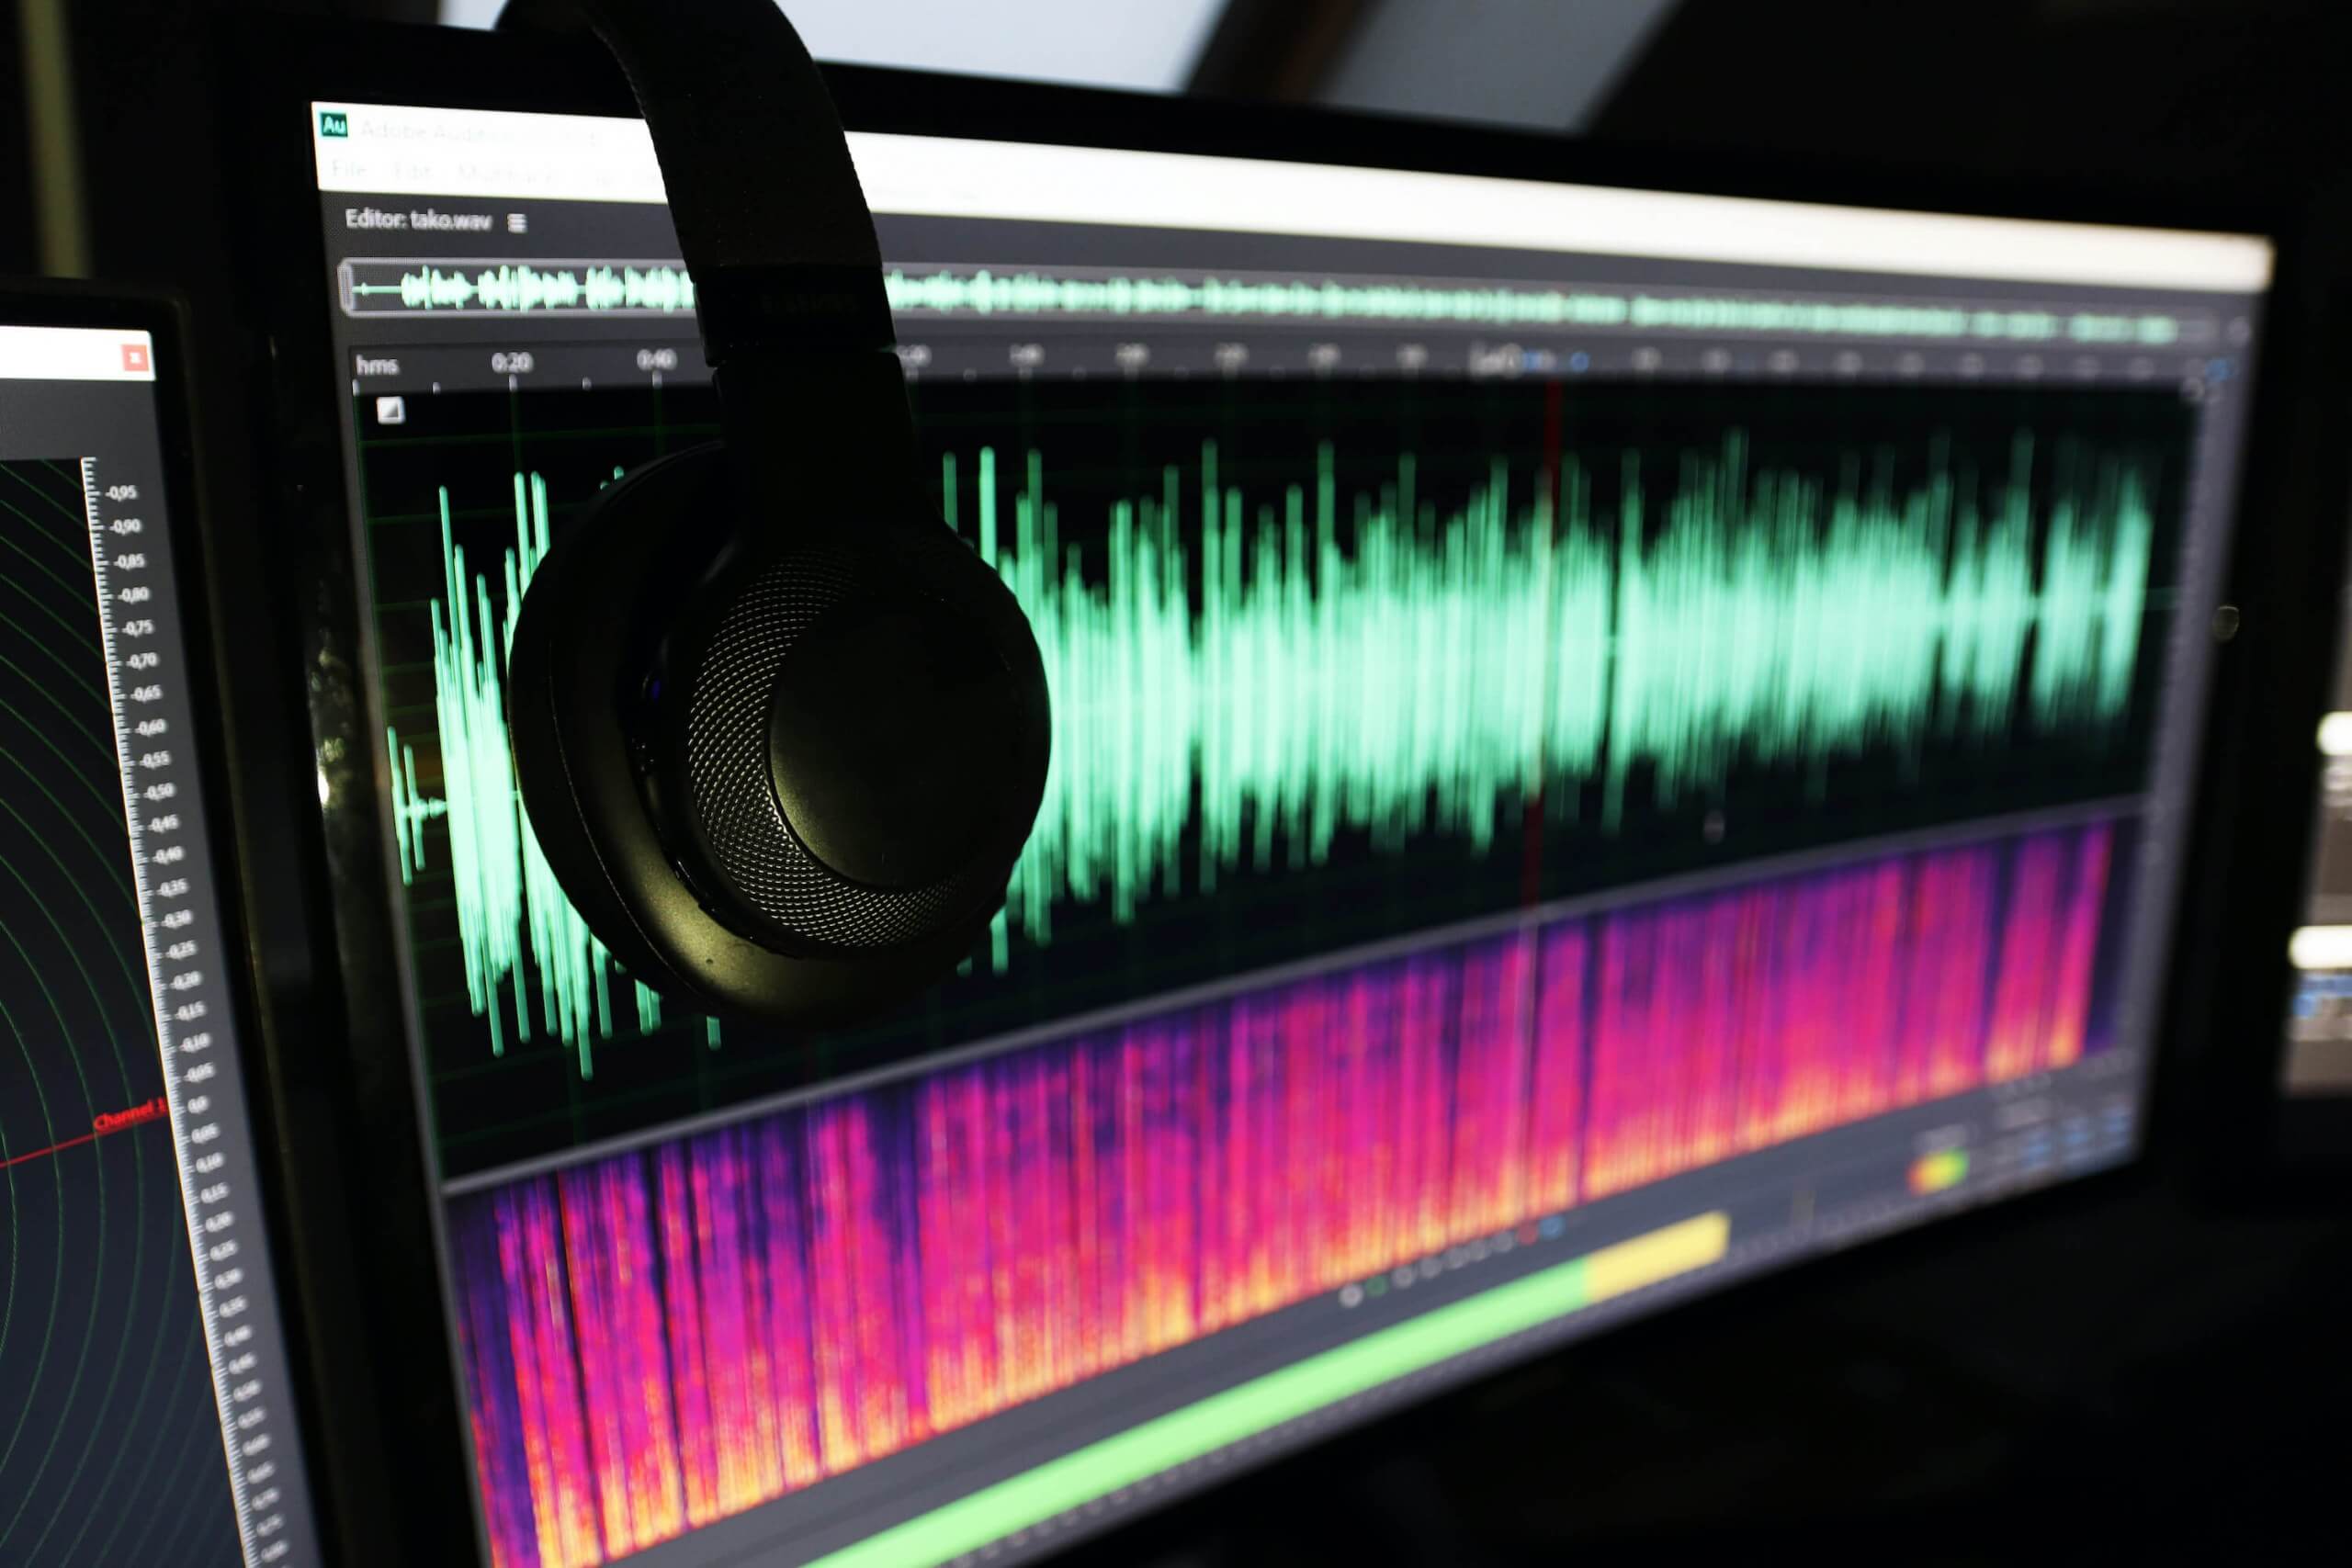 Adobe's Project Awesome Audio turns the worst audio into professional sounding recordings